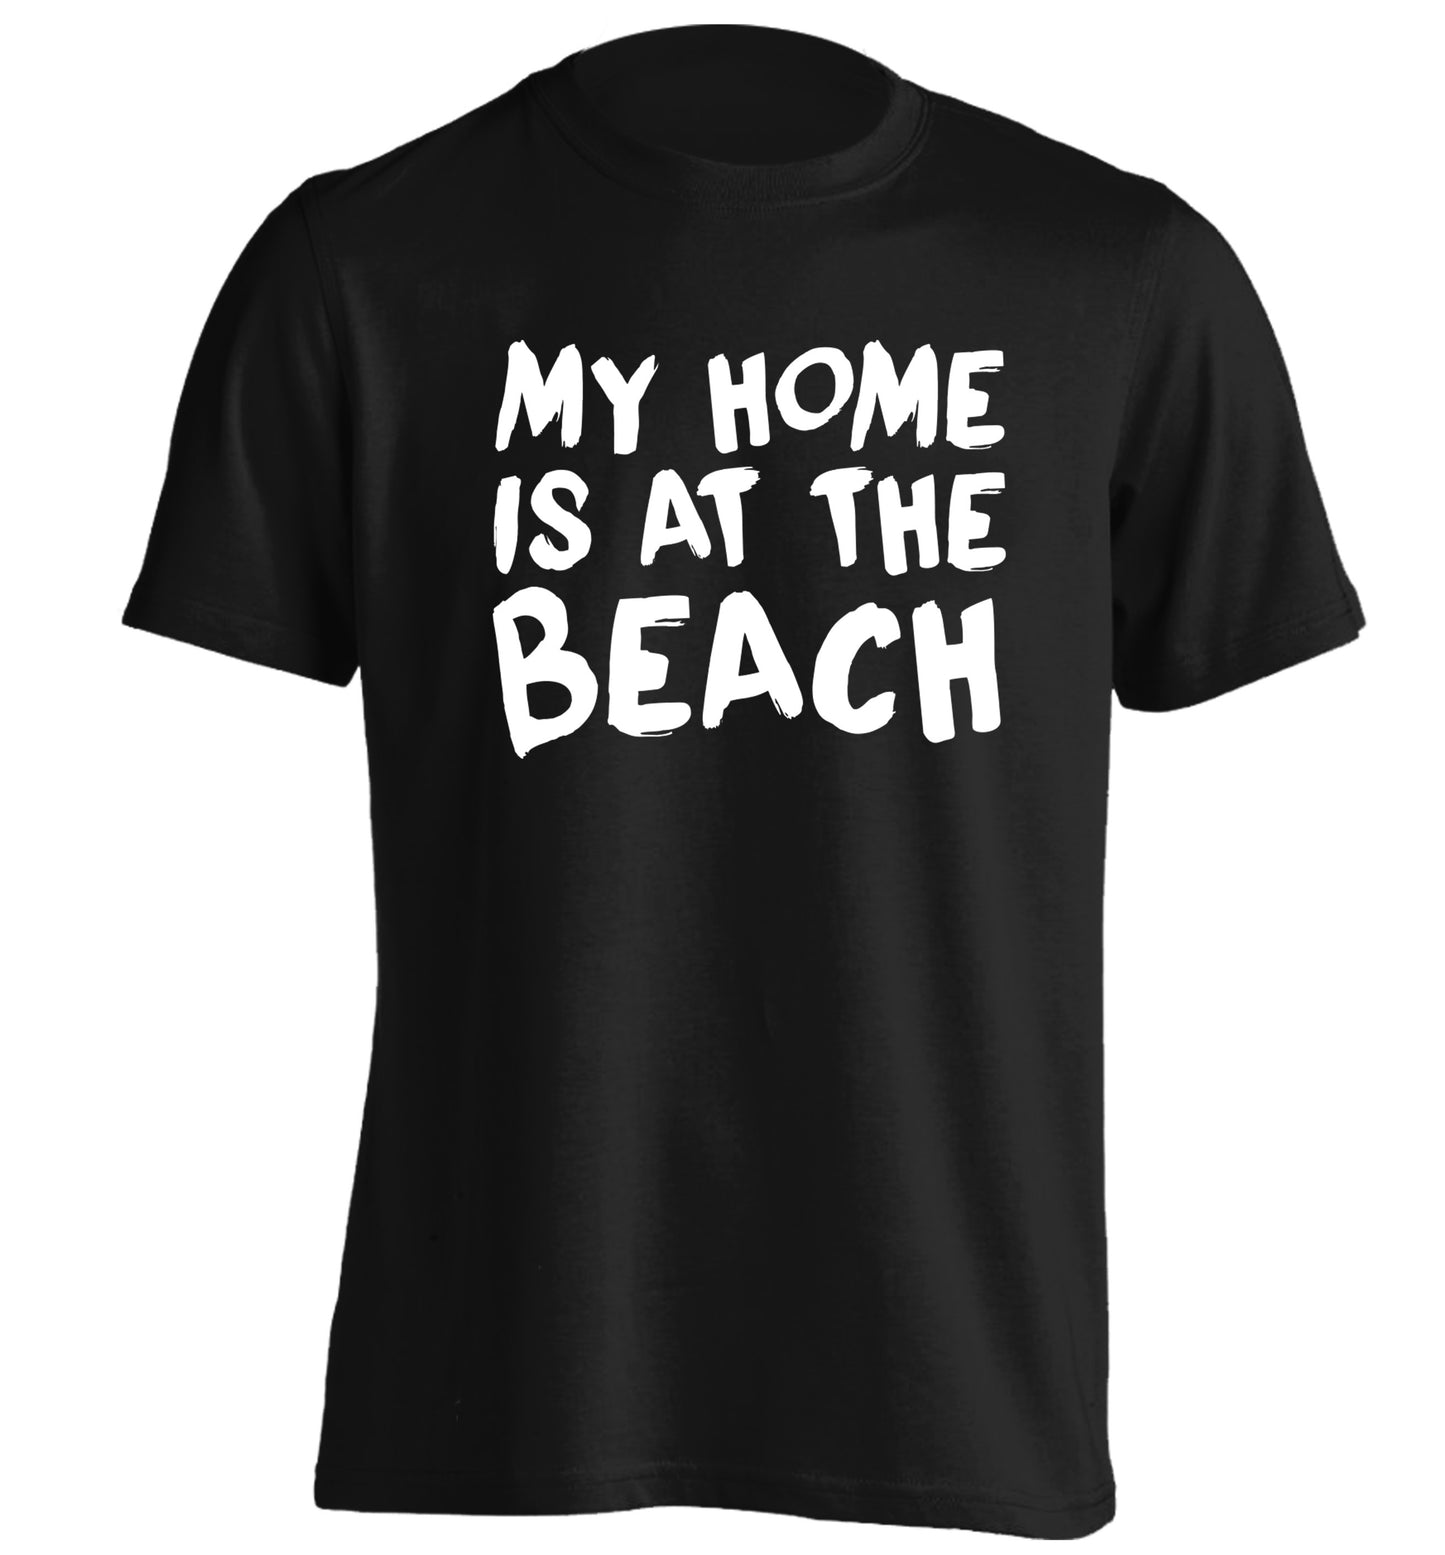 My home is at the beach adults unisex black Tshirt 2XL